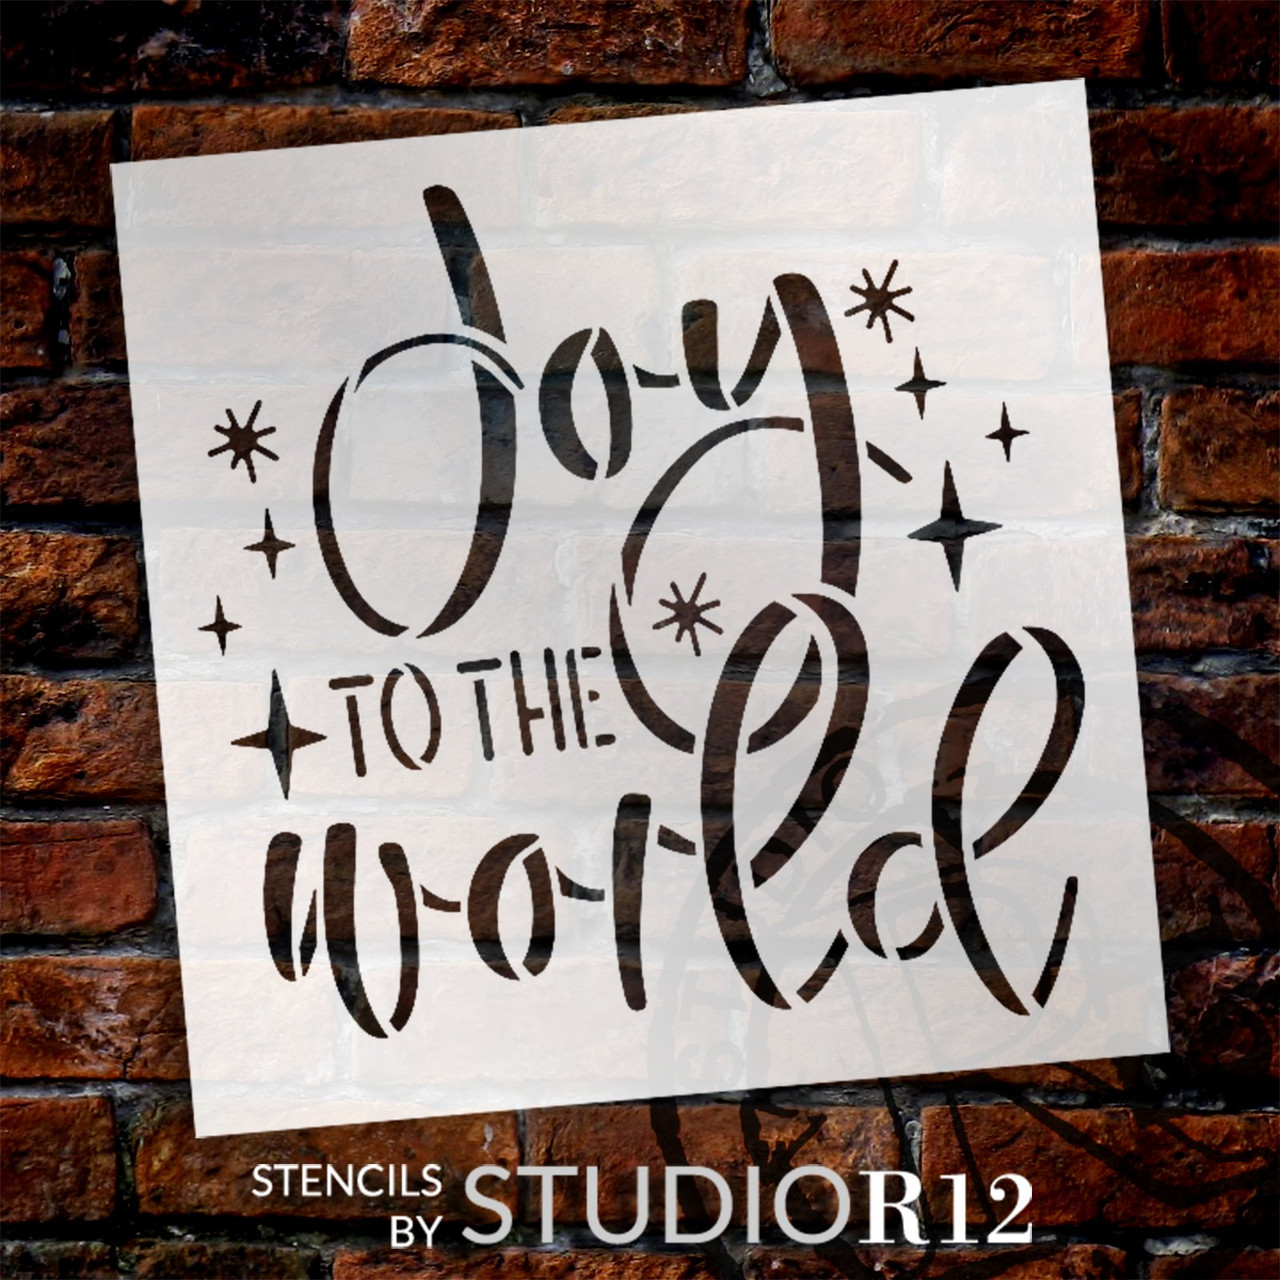 Joy to The World with Stars Word Art Stencil by StudioR12 - Select Size - USA Made - Craft DIY Farmhouse Living Room Decor | Paint Christmas Wood Sign